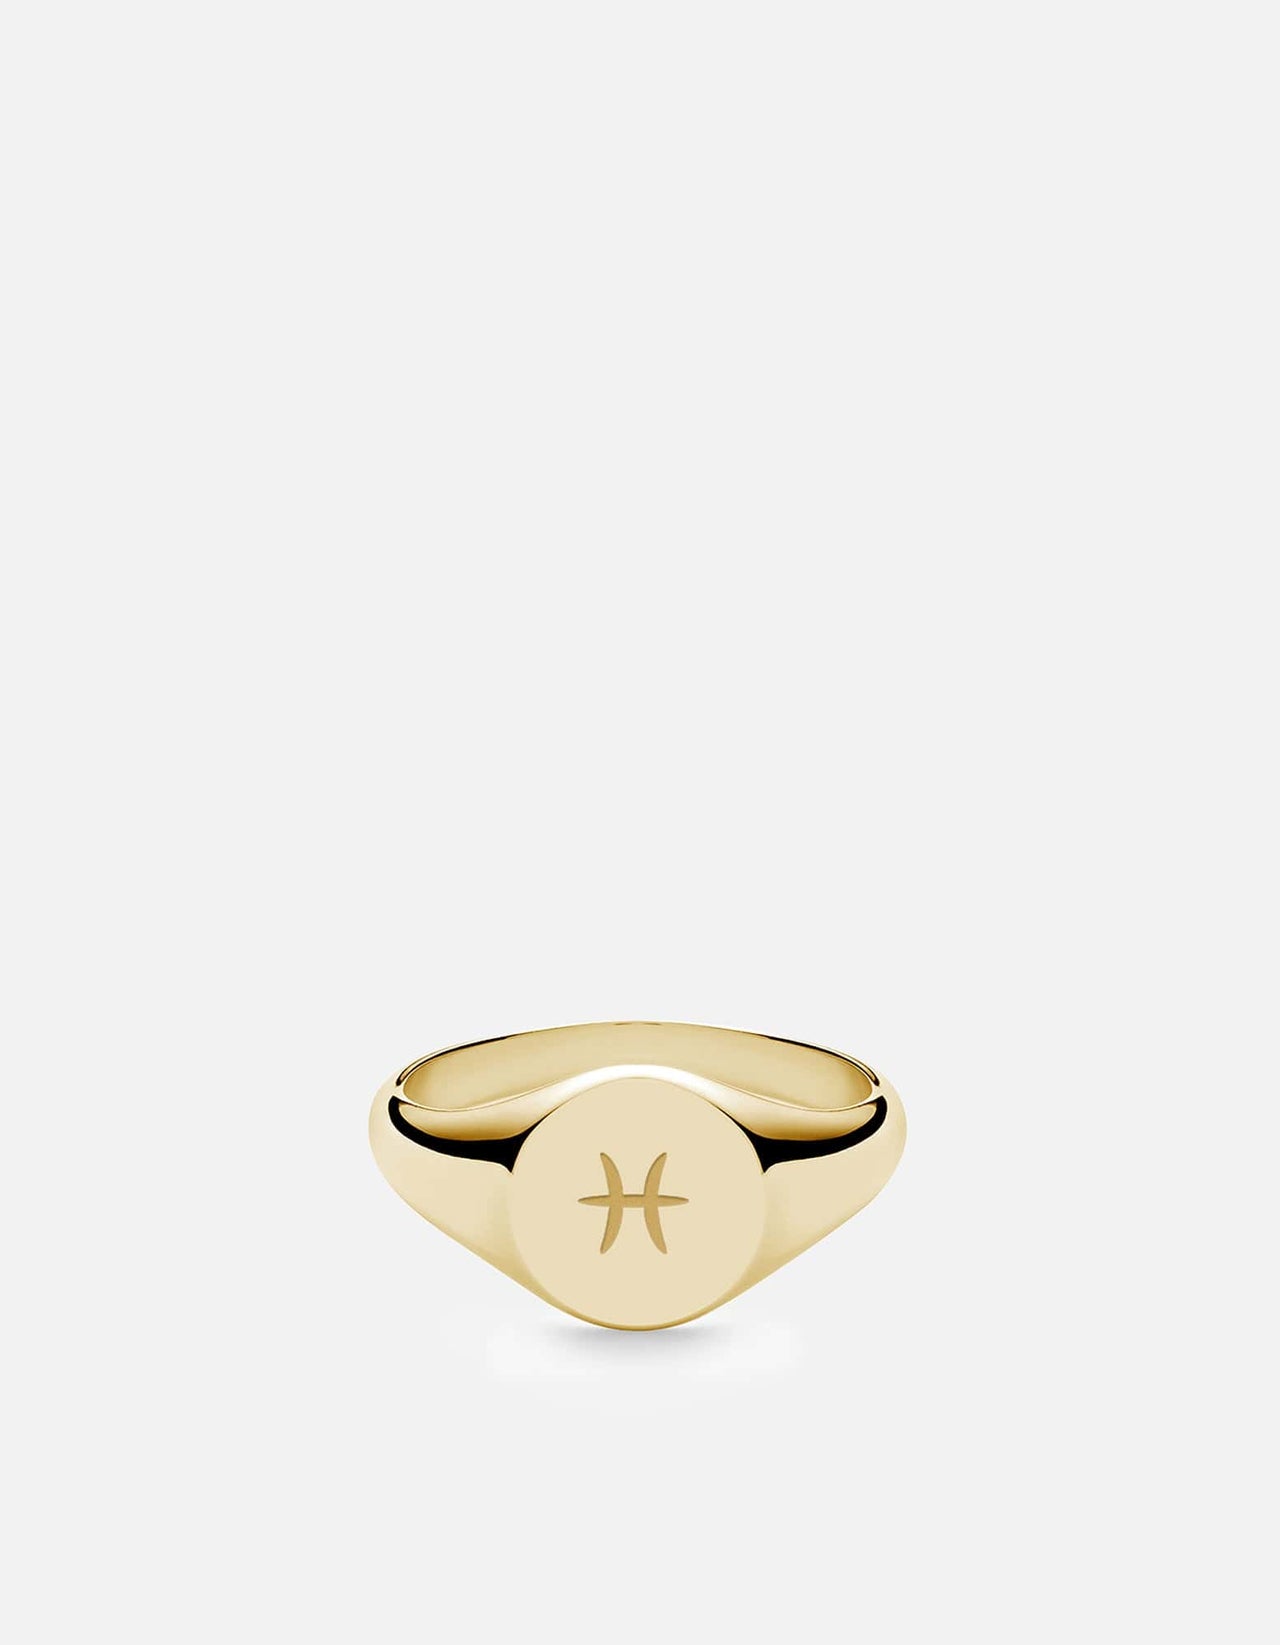 Men's Pinky Signet Ring Size-6 - jewelry - by owner - sale - craigslist